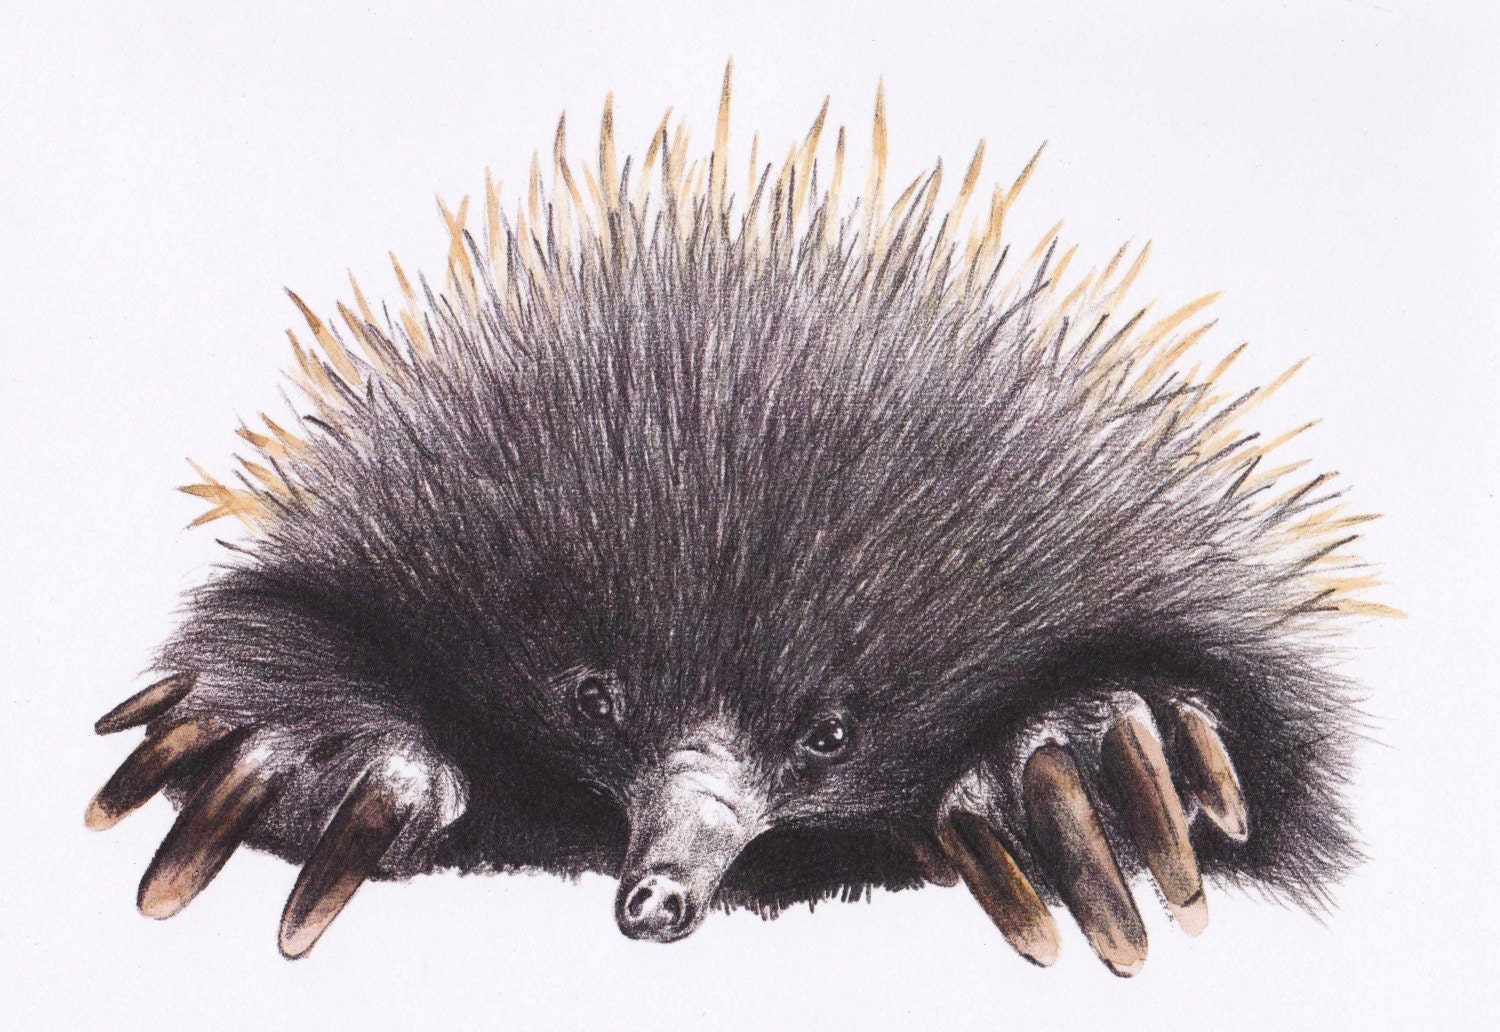 Echidna Illustration Print by staceyreesart on Etsy